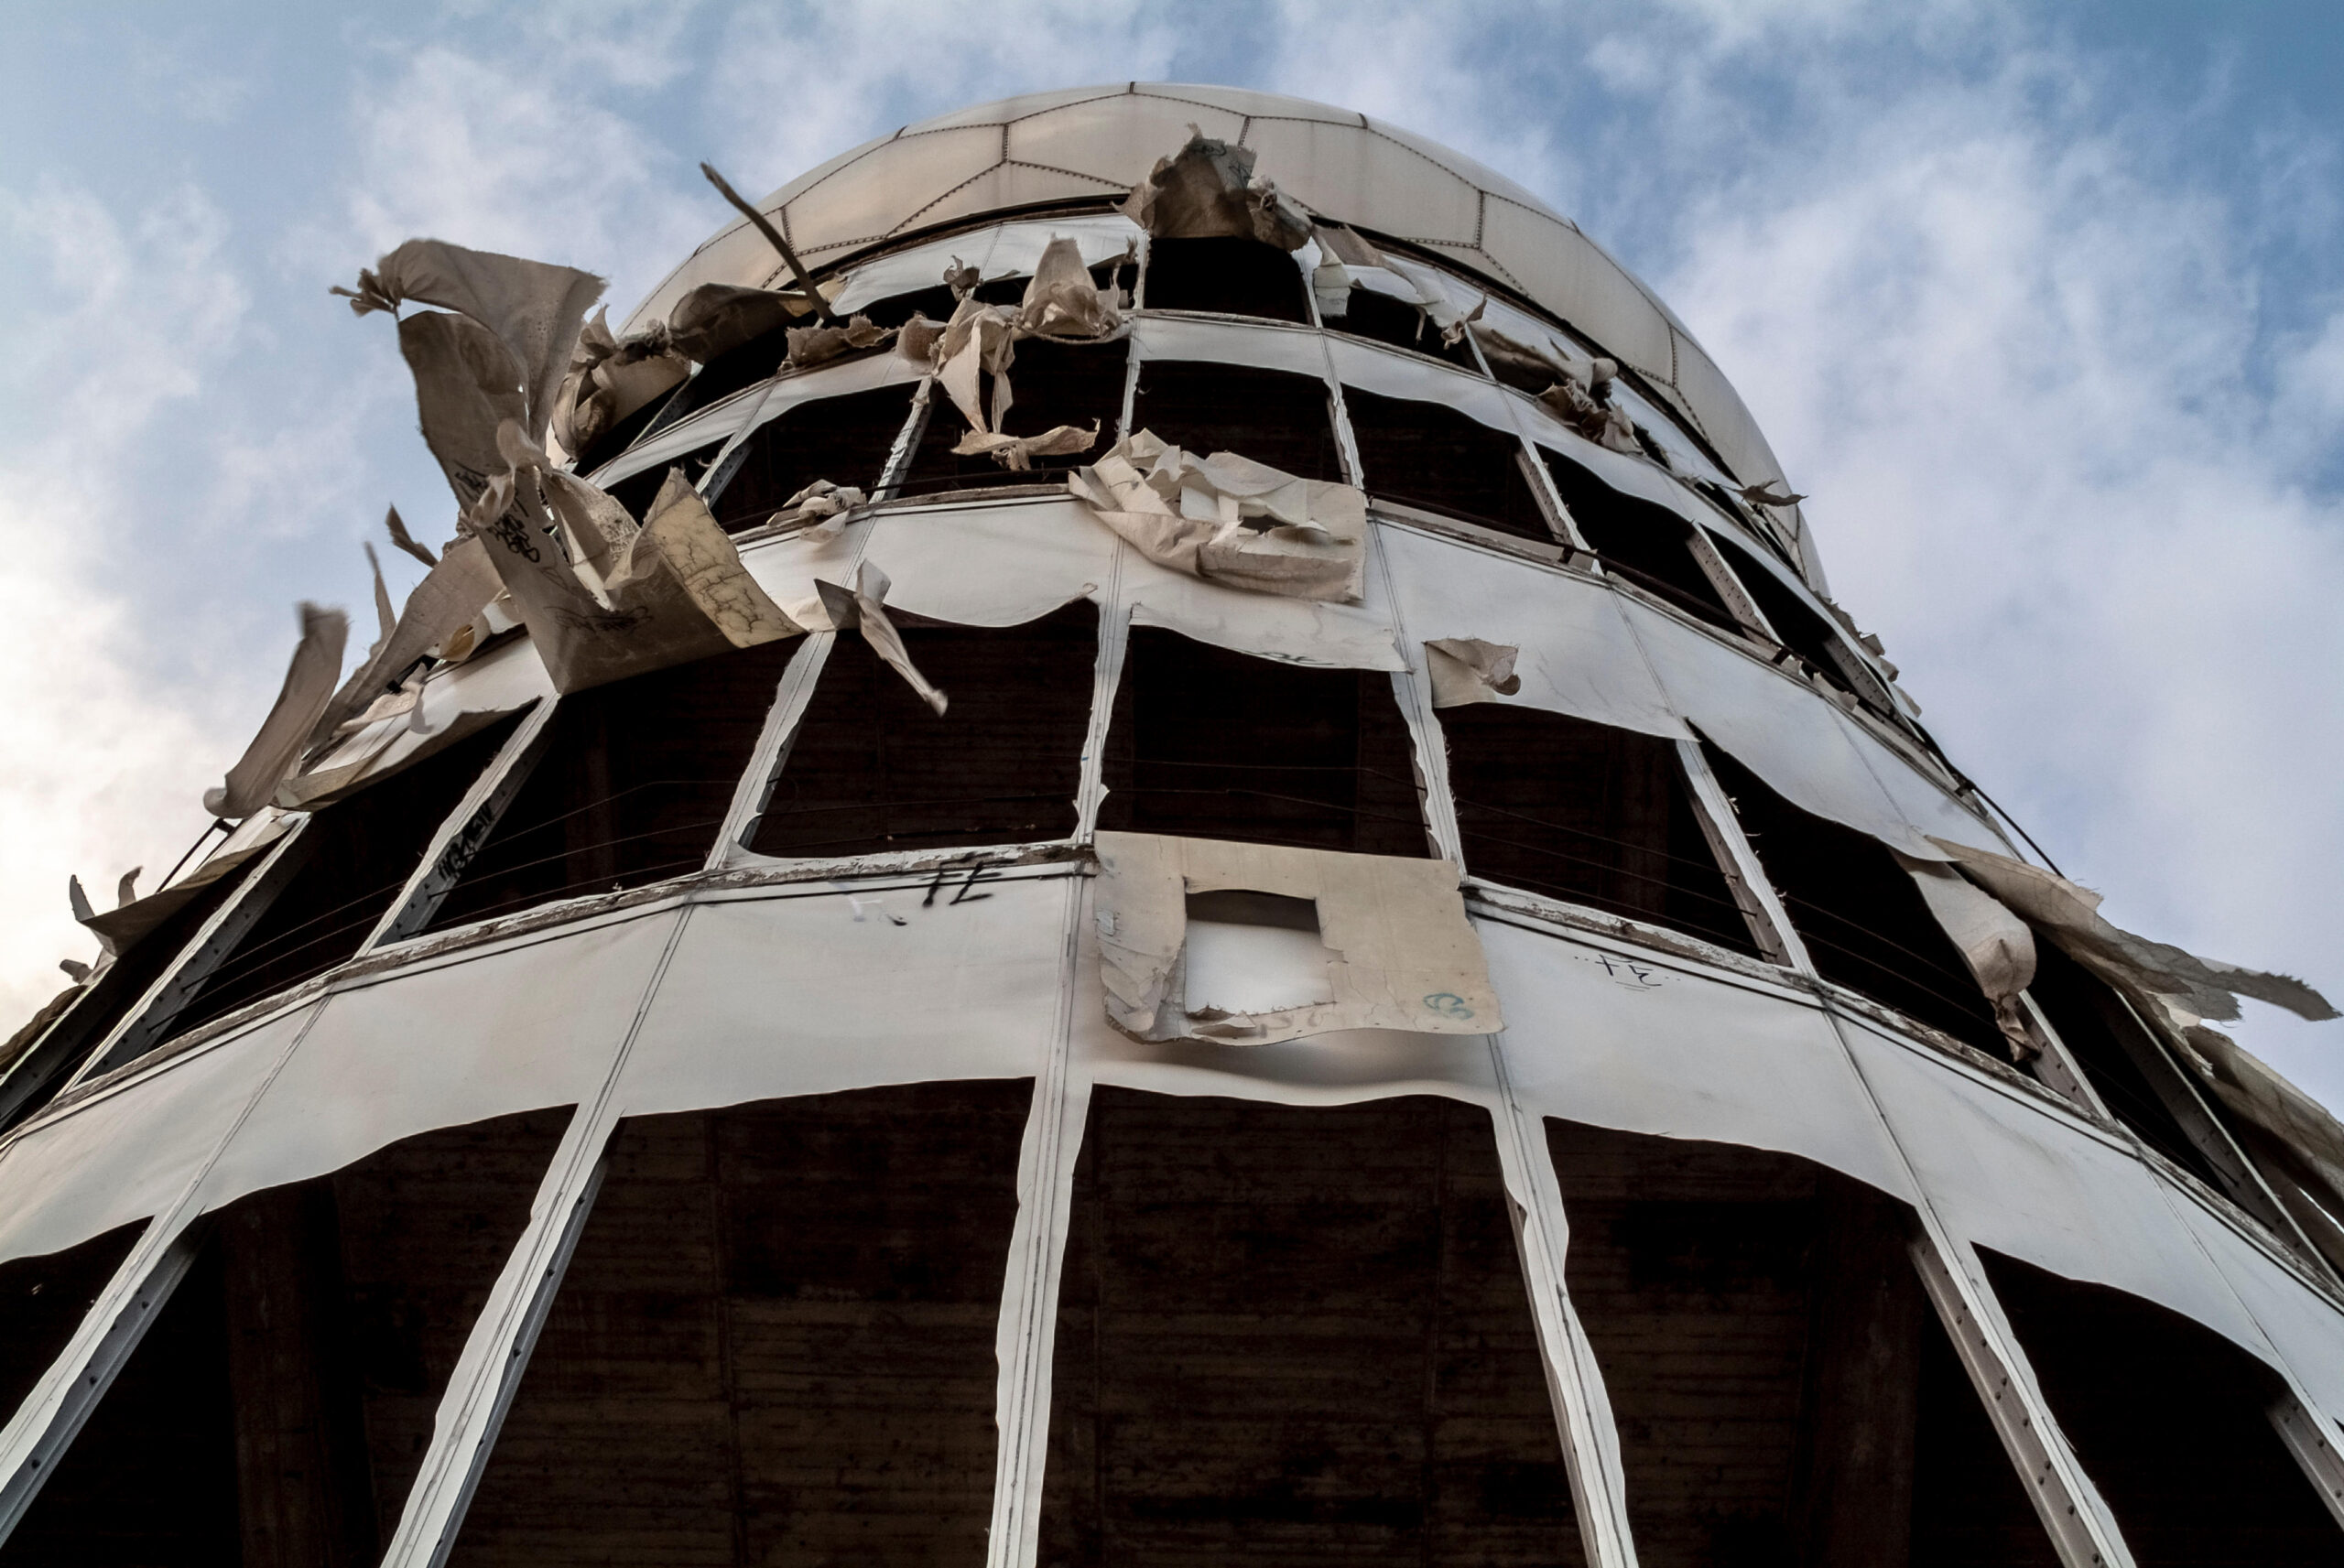 Its towers have fallen into disrepair after the site was abandoned by the NSA